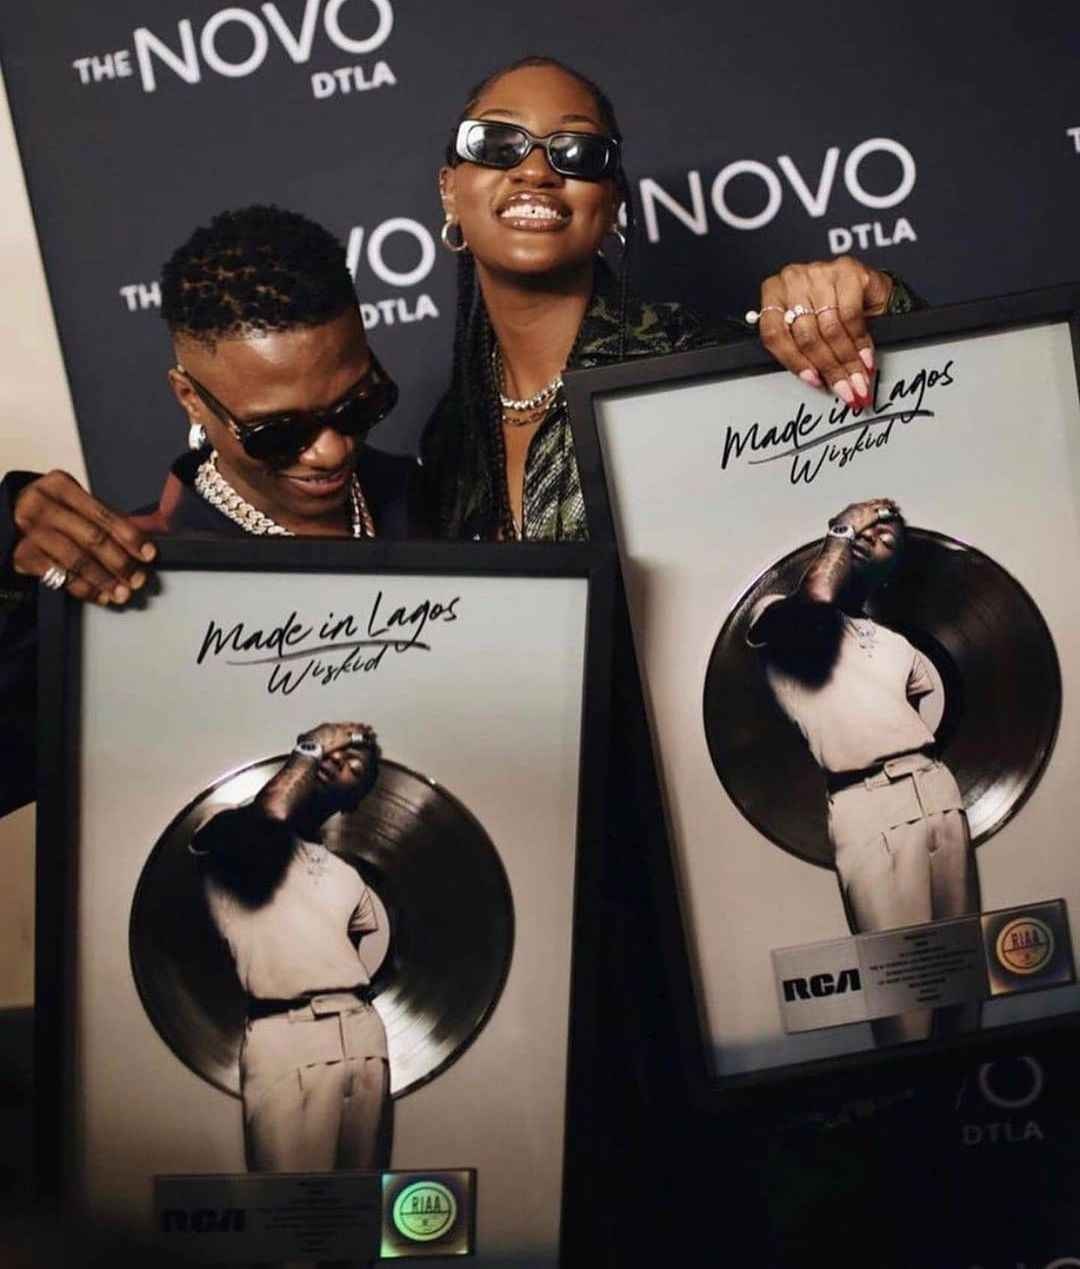 Wizkid Becomes First Nigerian Artiste Ever in History to Have a Platinum Song Certified By RIAA